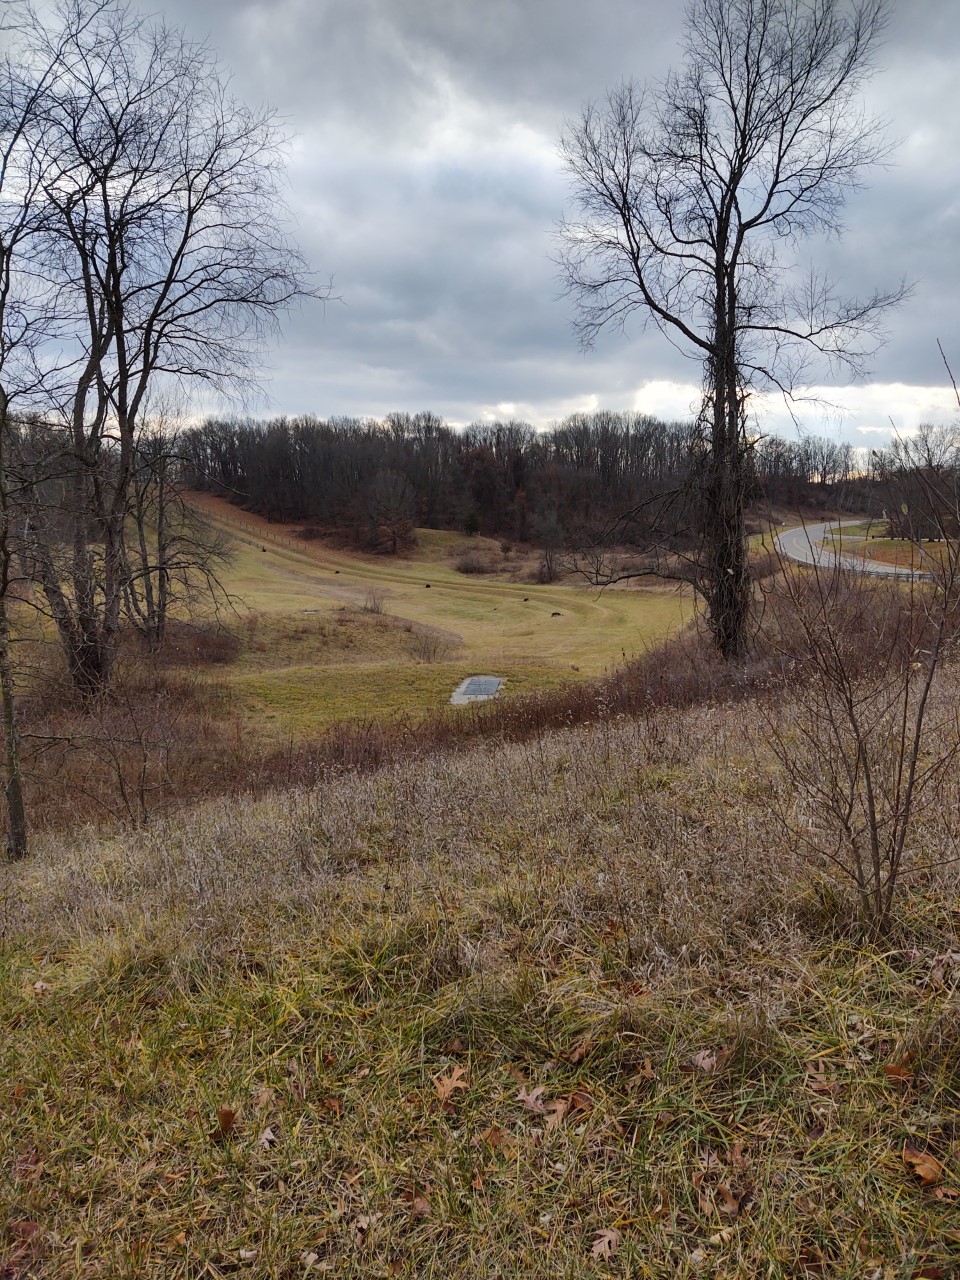 This is the view from the new MPO tee on hole 17